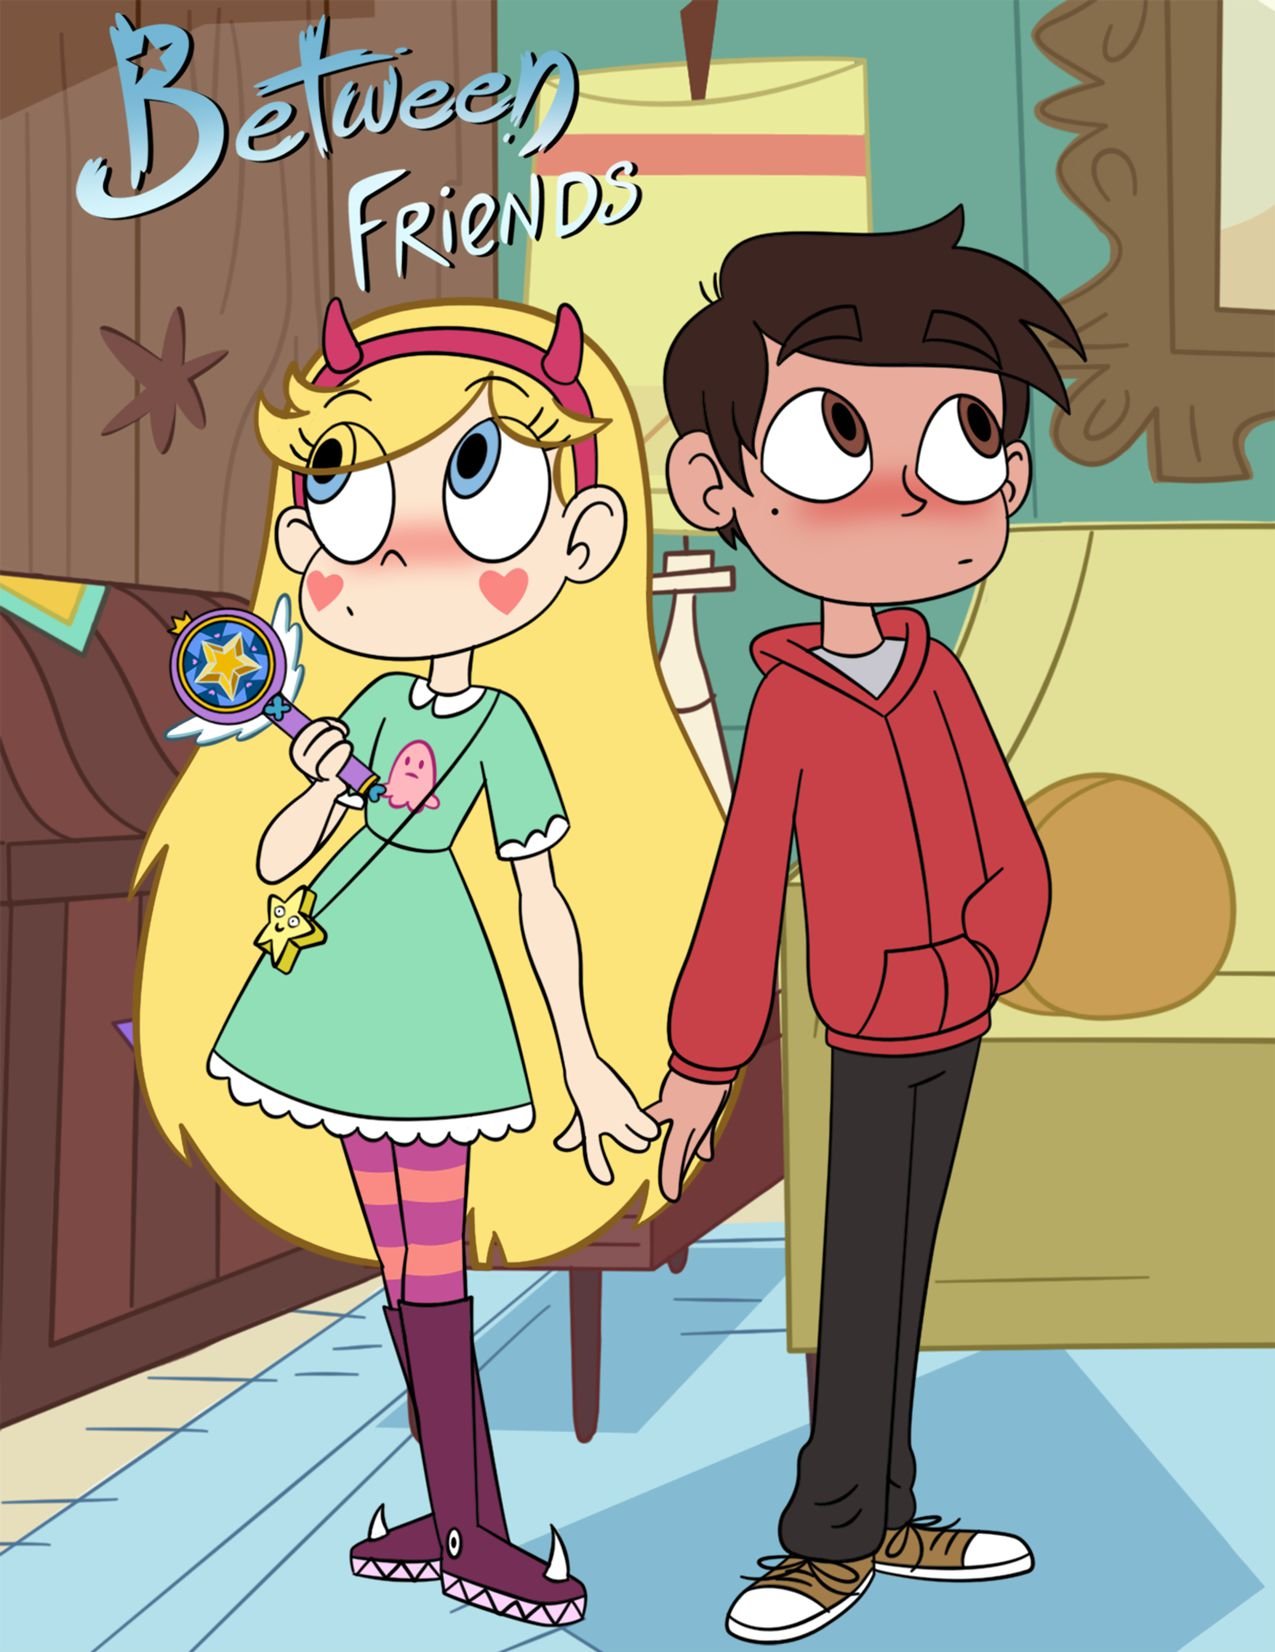 Star Versus The Forces Of Evil Porno